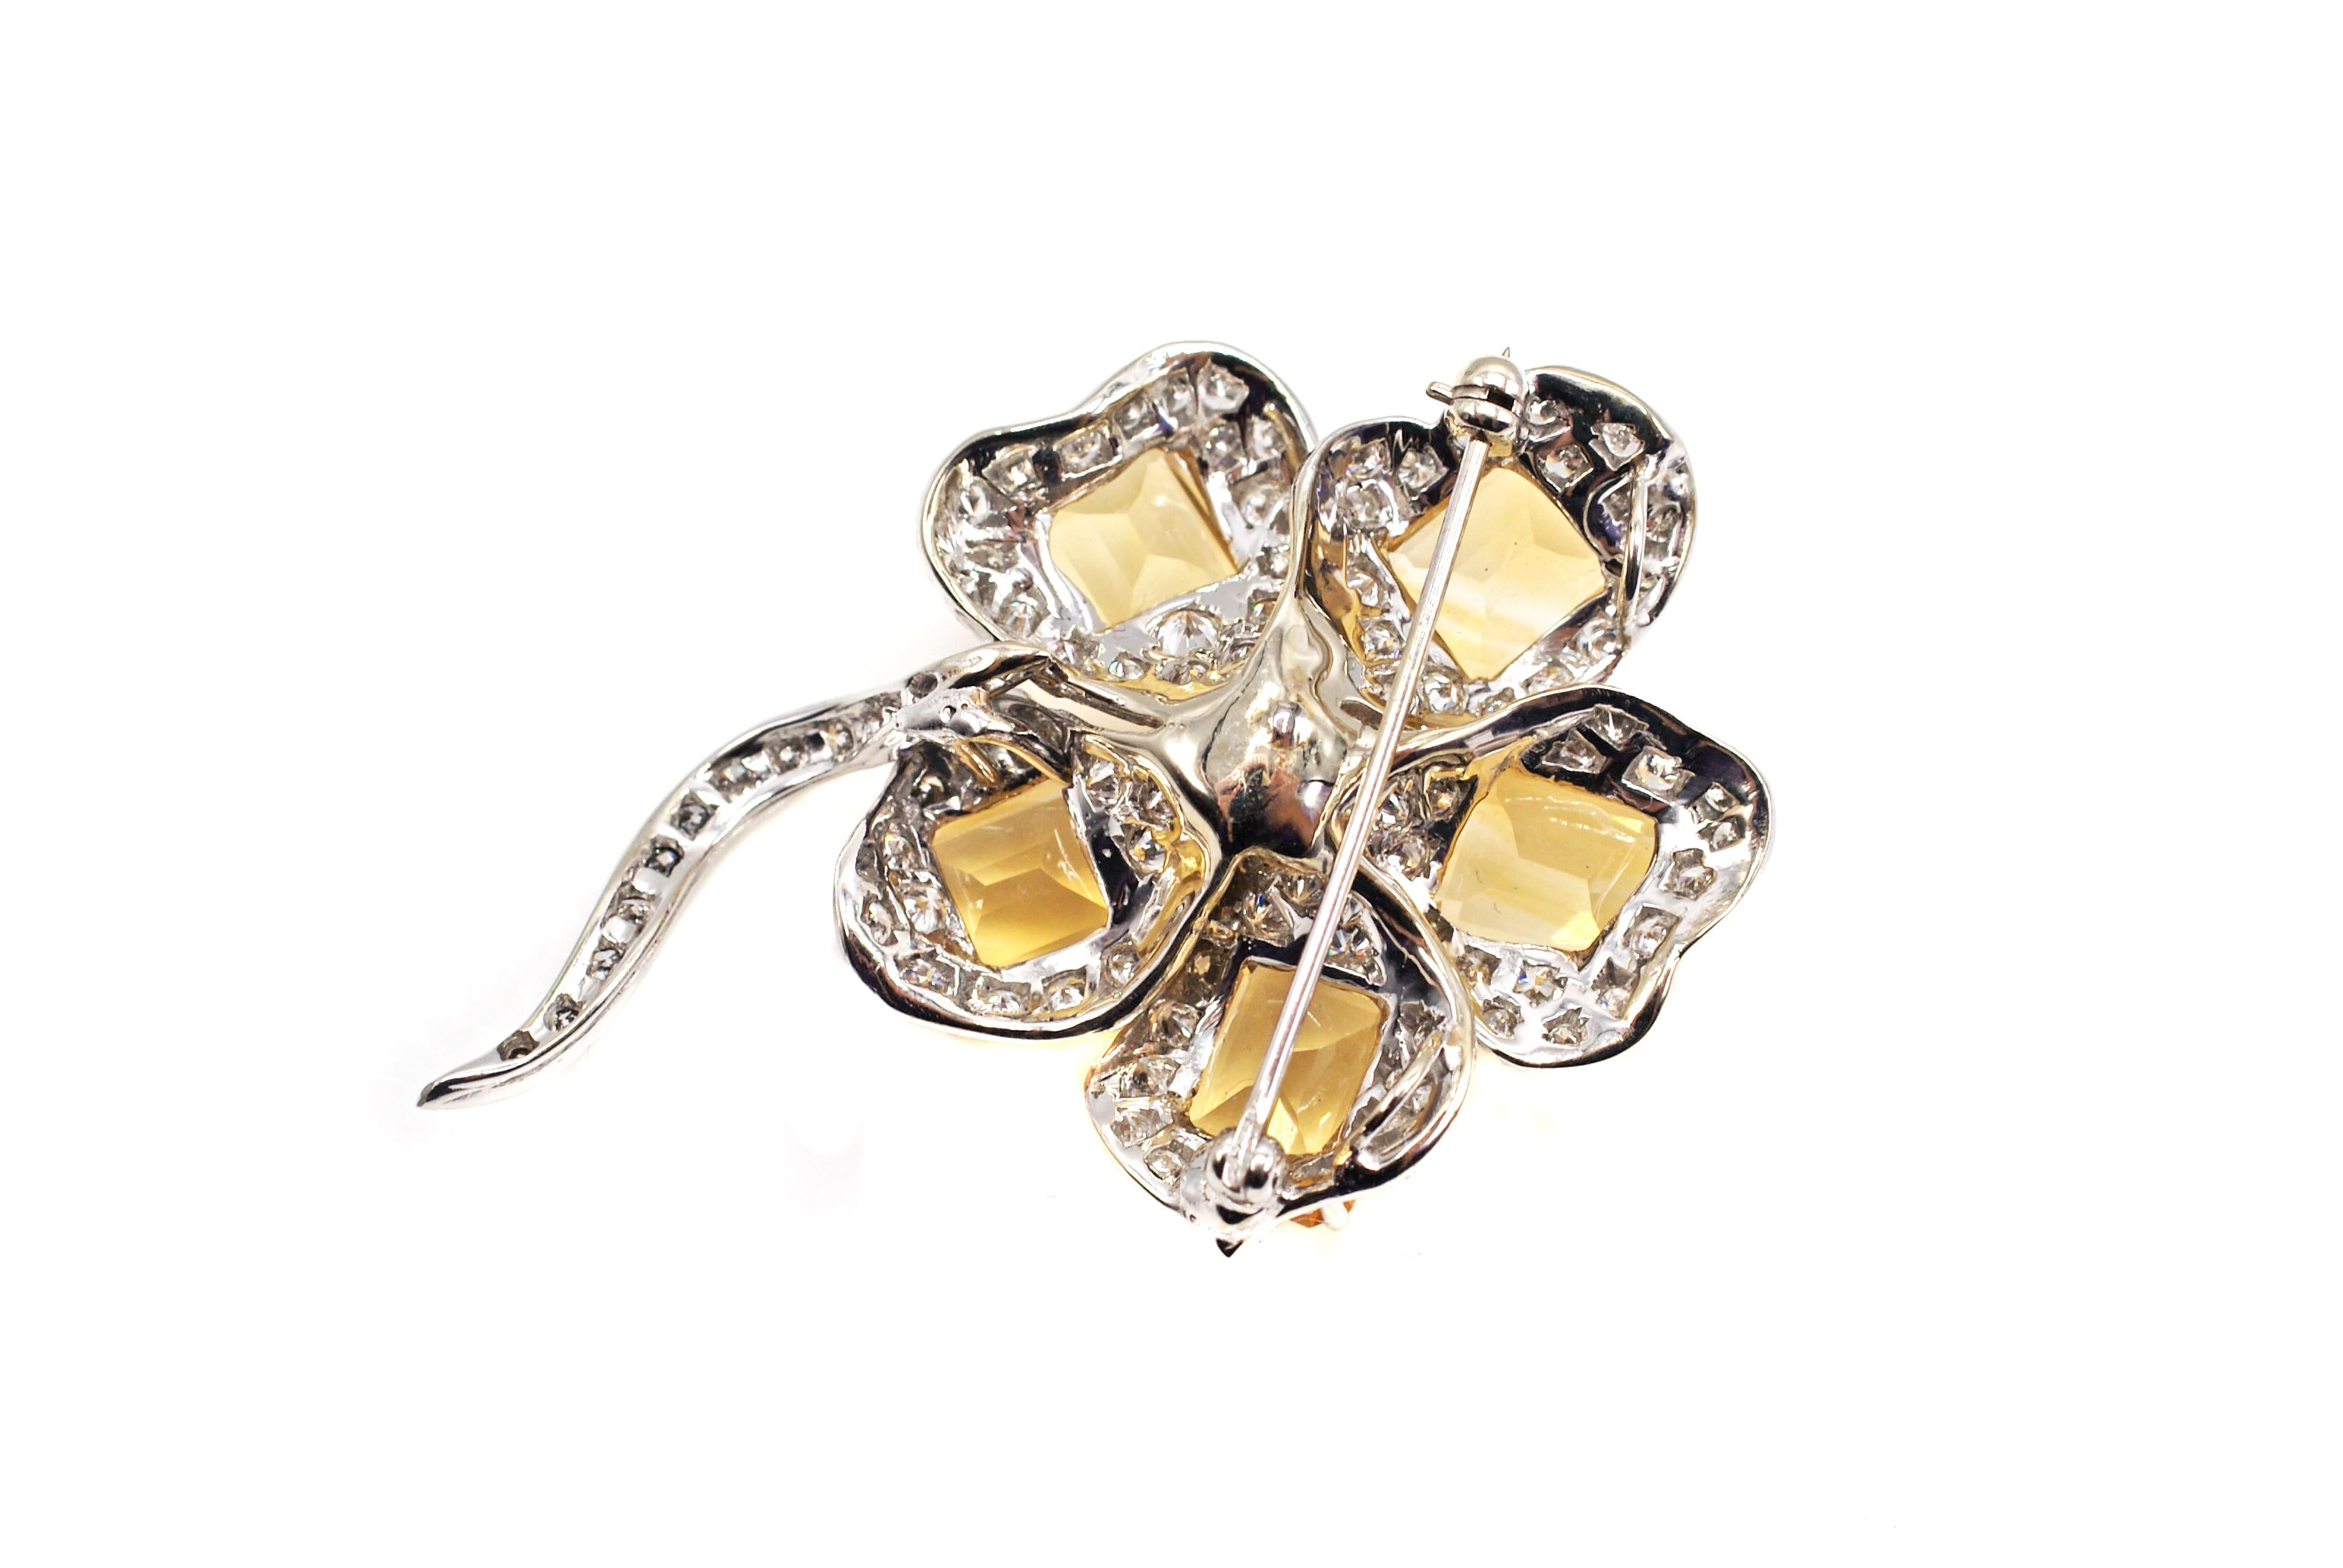 This beautifully designed and well hand-crafted flower brooch from ca. 1960 is worked in a wonderful three dimensional and true-to-nature fashion. Each of the petals is set with a perfectly matched bright yellow emerald cut citrine while the but